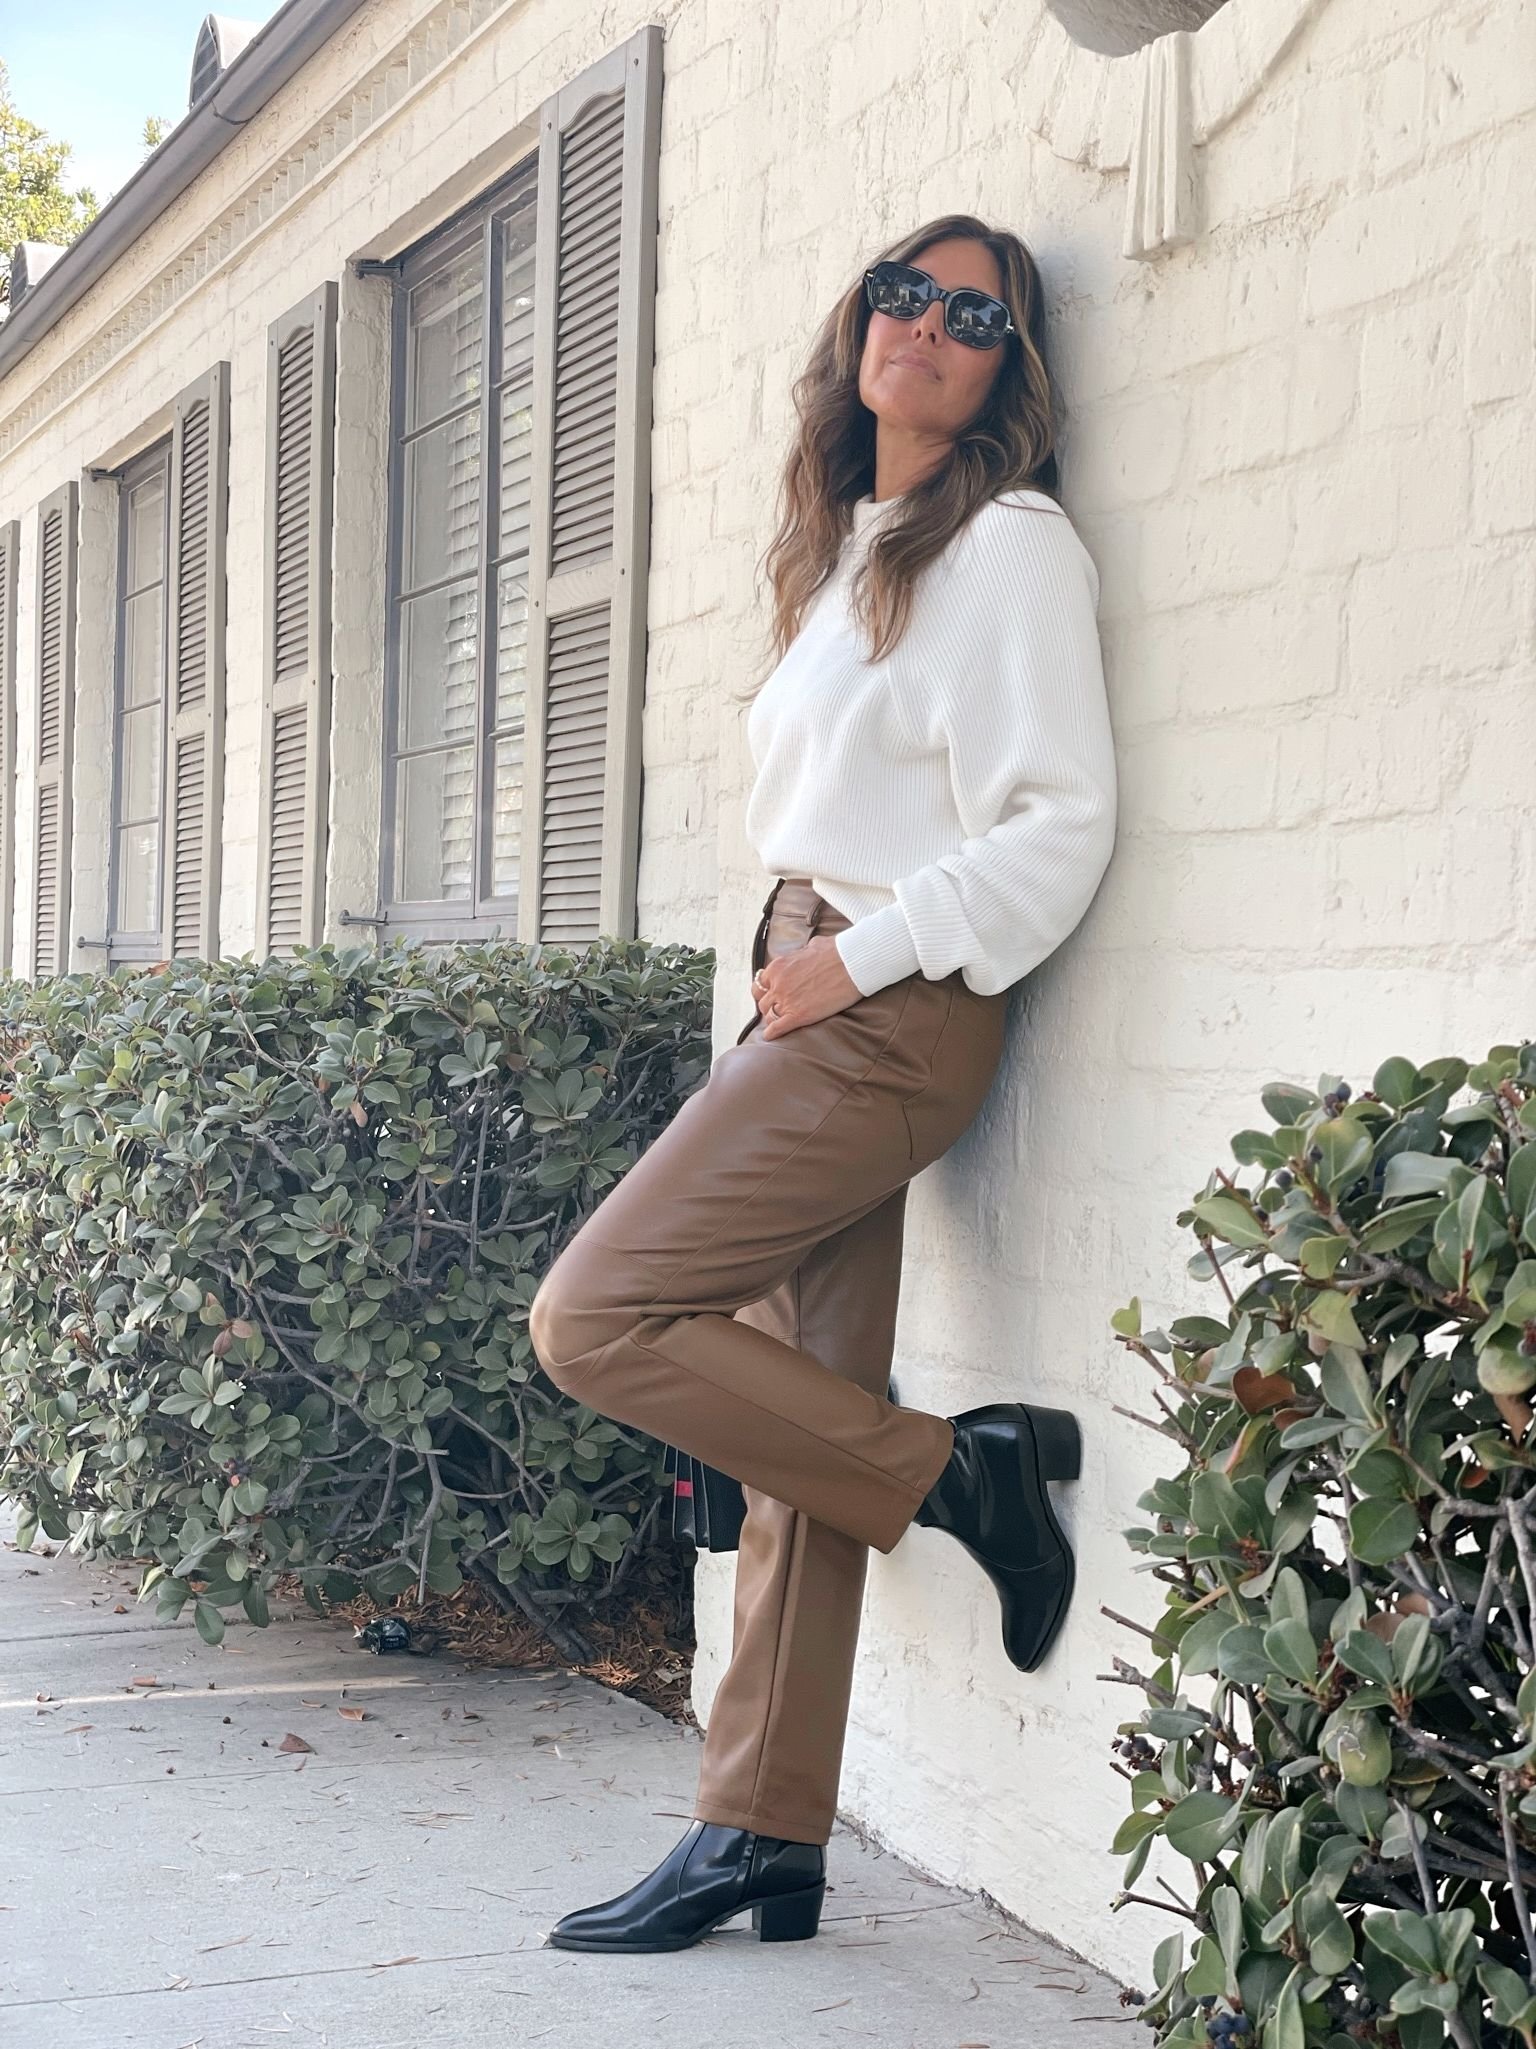 Wardrobe Update with This Chic Brown Outfit — The Glow Girl by Melissa  Meyers